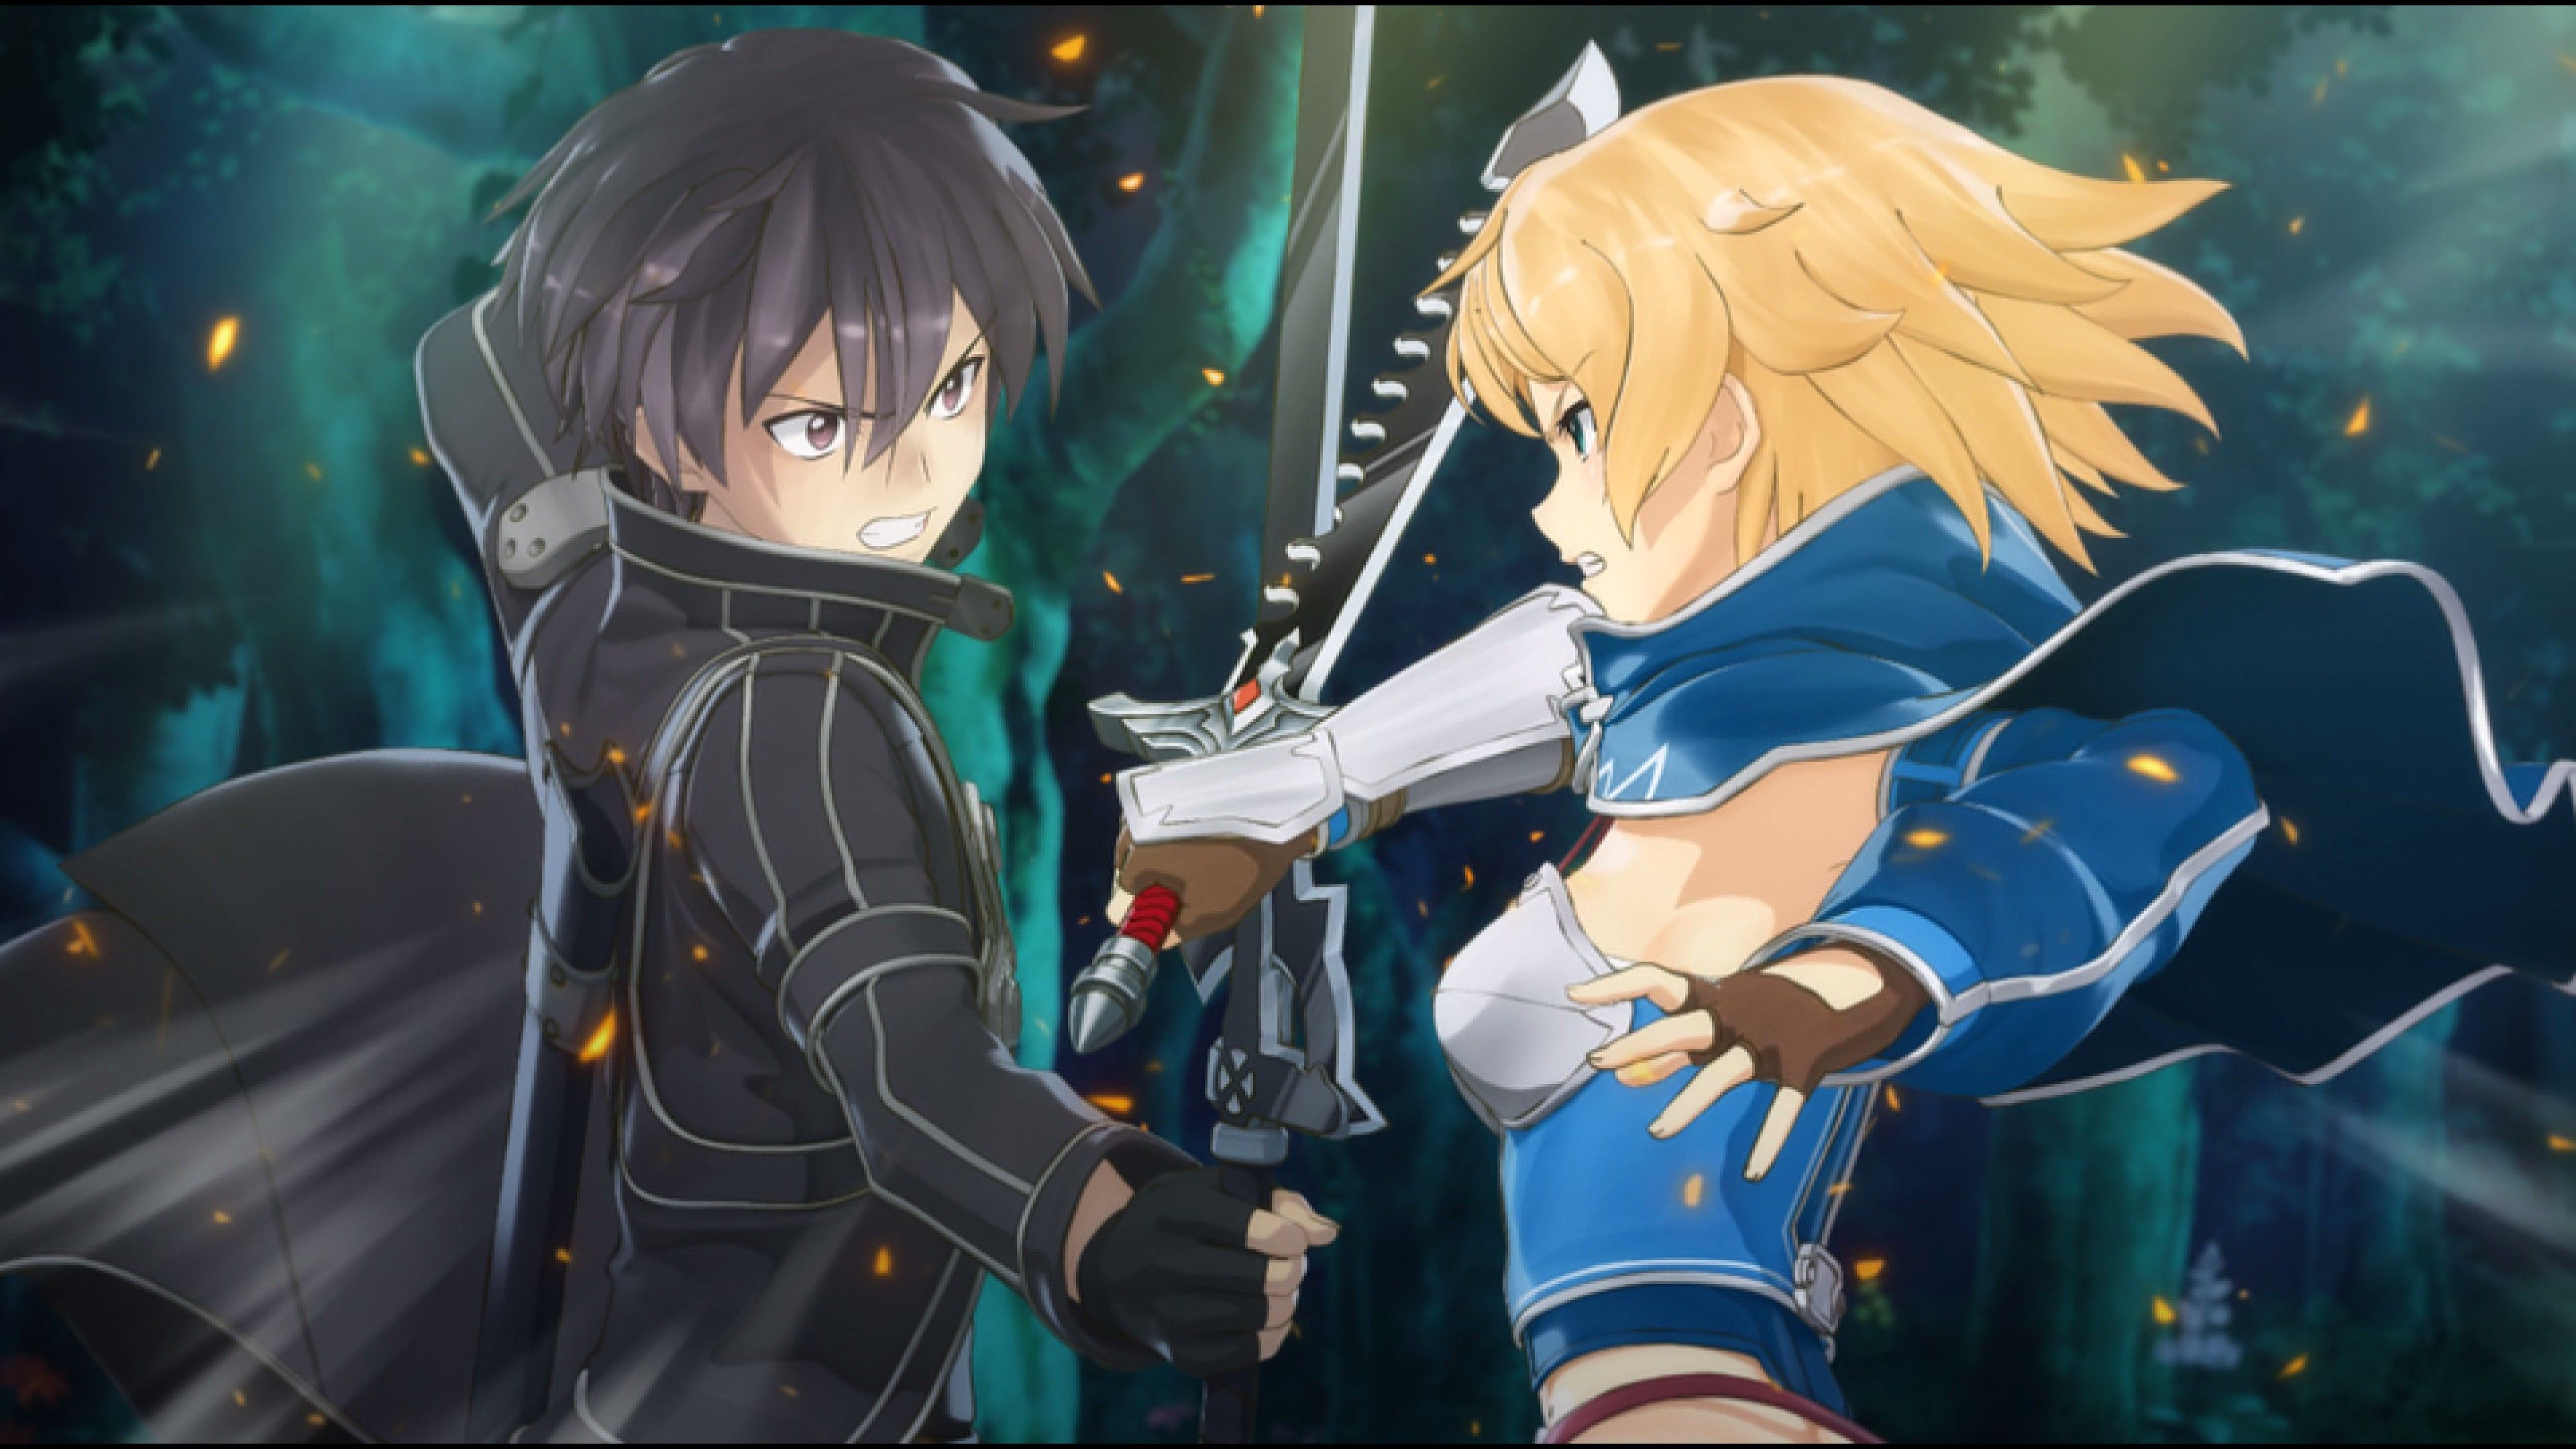 Sword Art Online Re: Hollow Fragment Gets Standalone PC Release on